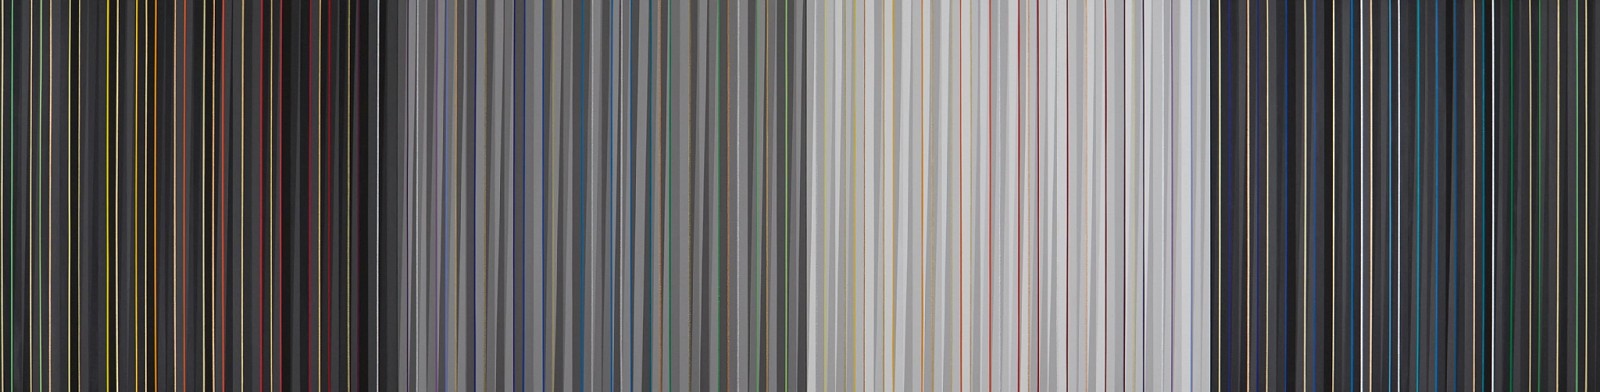 Gabriele Evertz, (A-) Chromatics (Day + Dream), 2016
Acrylic on Canvas mounted to wood panel, 42 x 168 inches (4 panels at 42x42 in.)
EVER00003